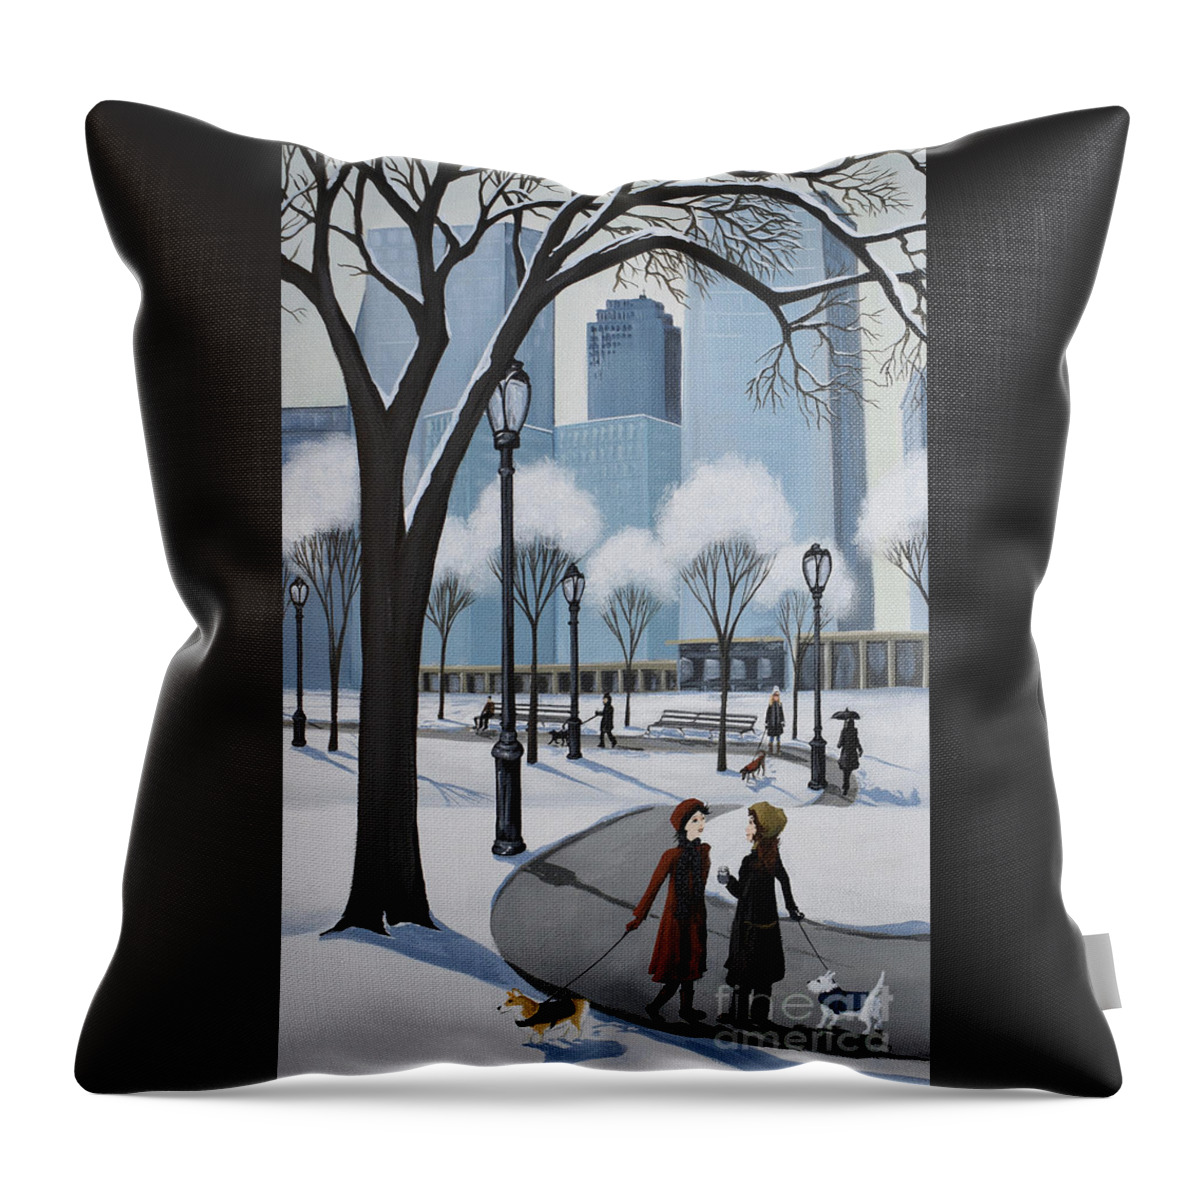 Central Park Throw Pillow featuring the painting Central Park New York puppies dog by Debbie Criswell